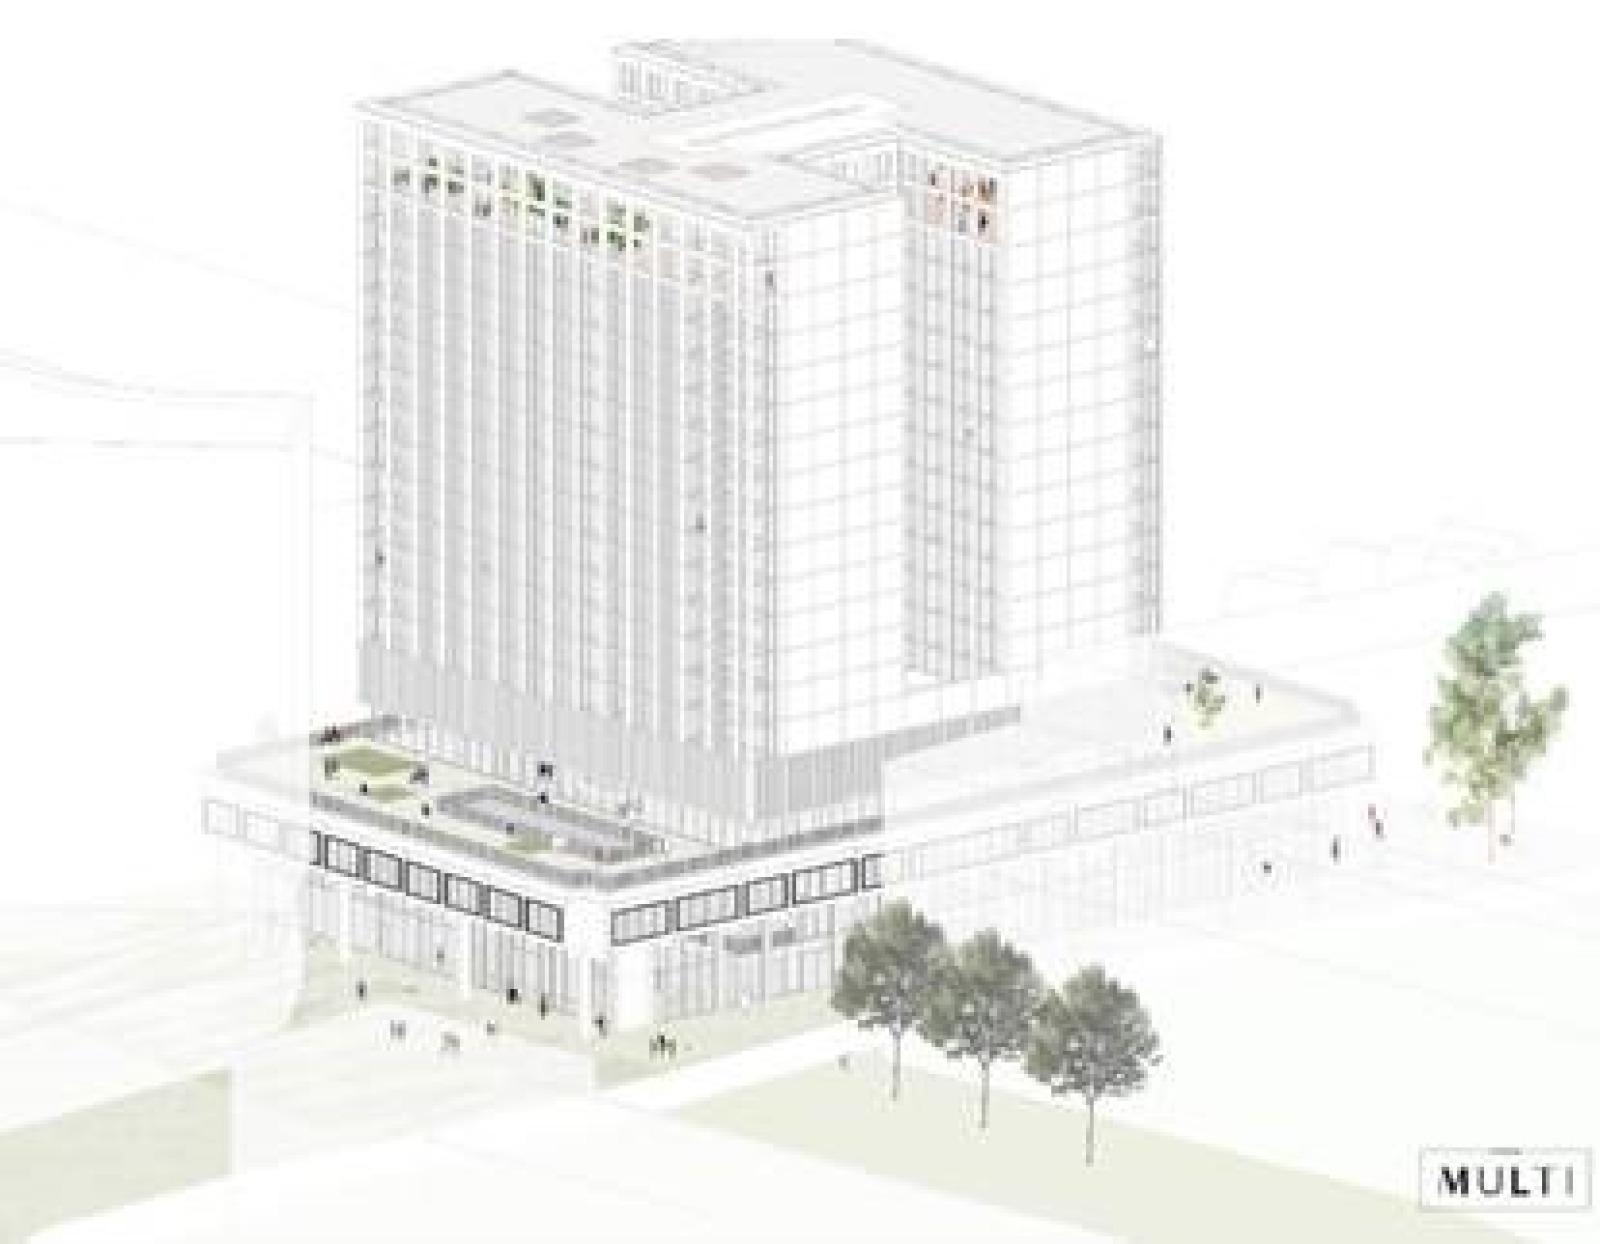 Transformation of a modernist tower in the centre of Brussels